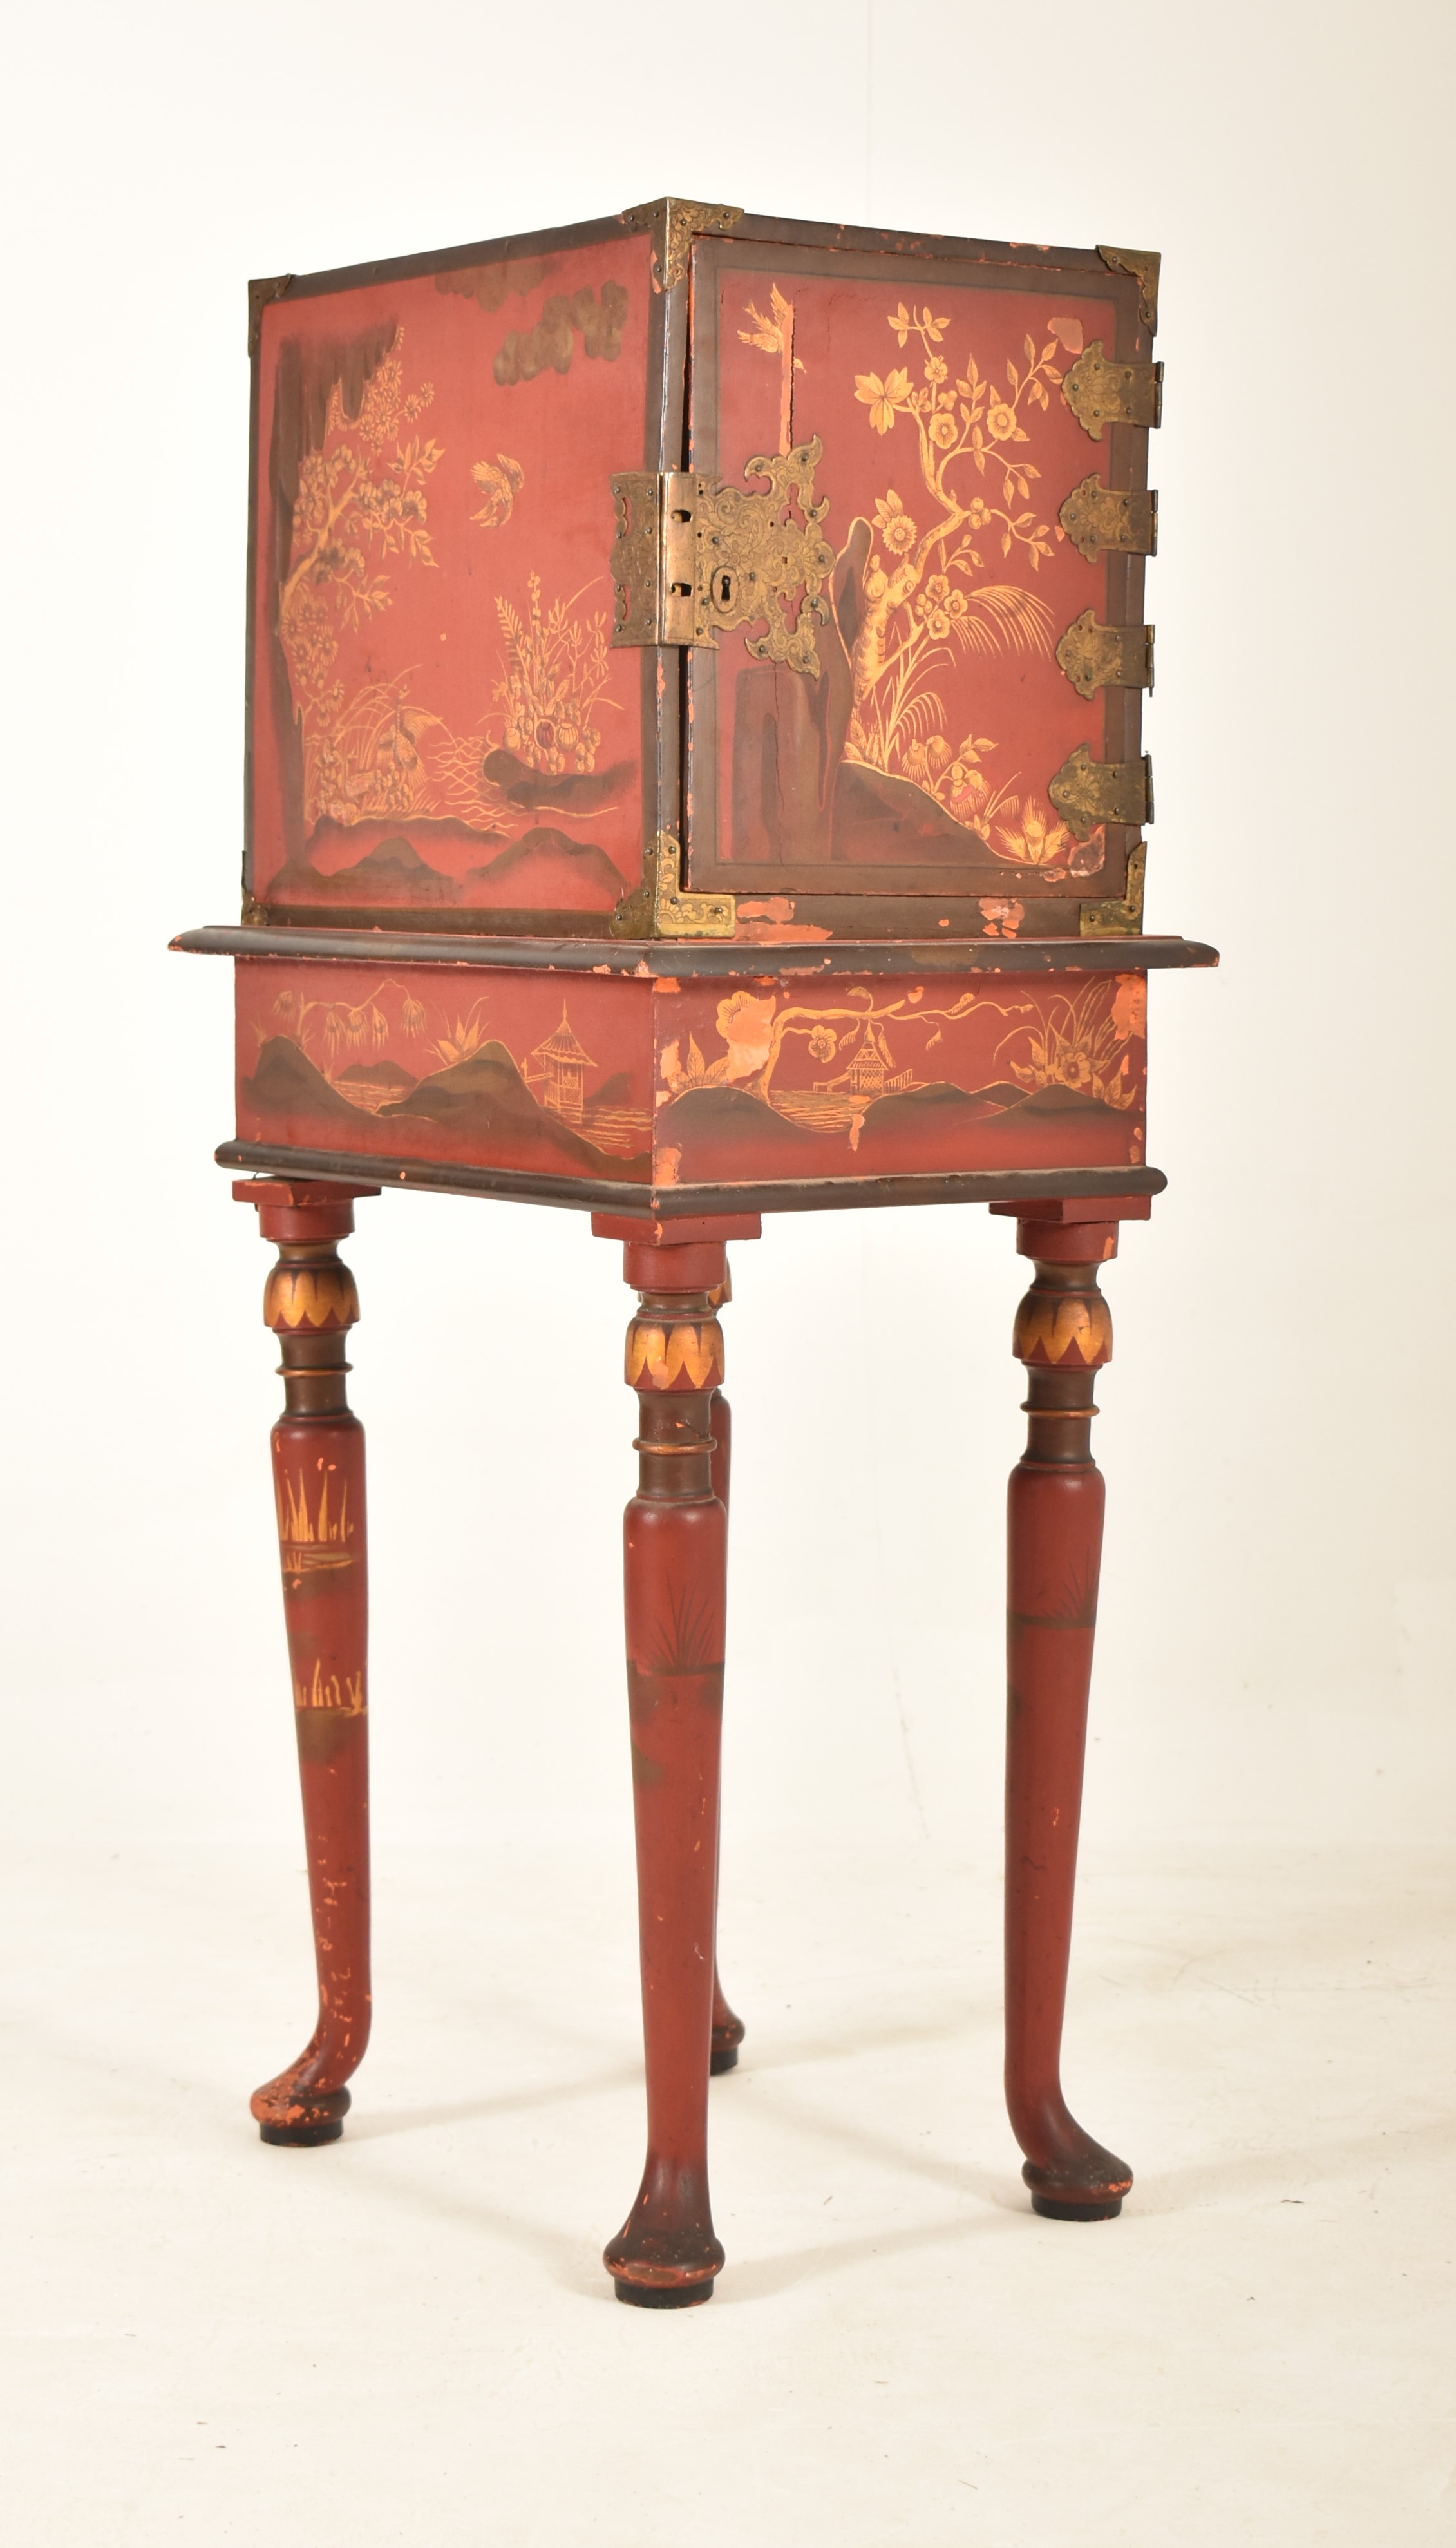 LATE 19TH CENTURY CHINESE RED LACQUERED CABINET ON STAND